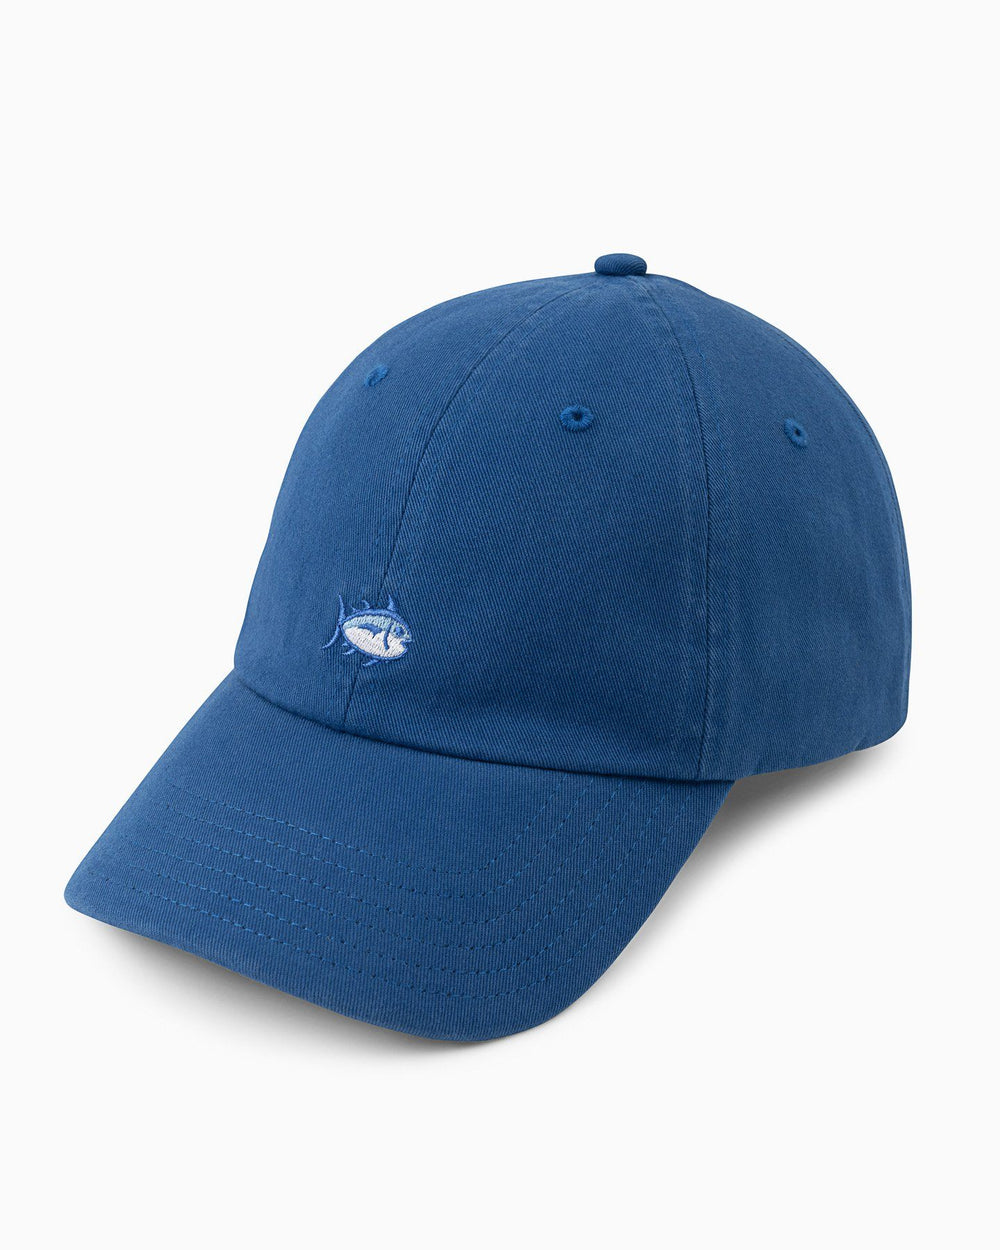 The front of the Skipjack Hat by Southern Tide - Boat Blue